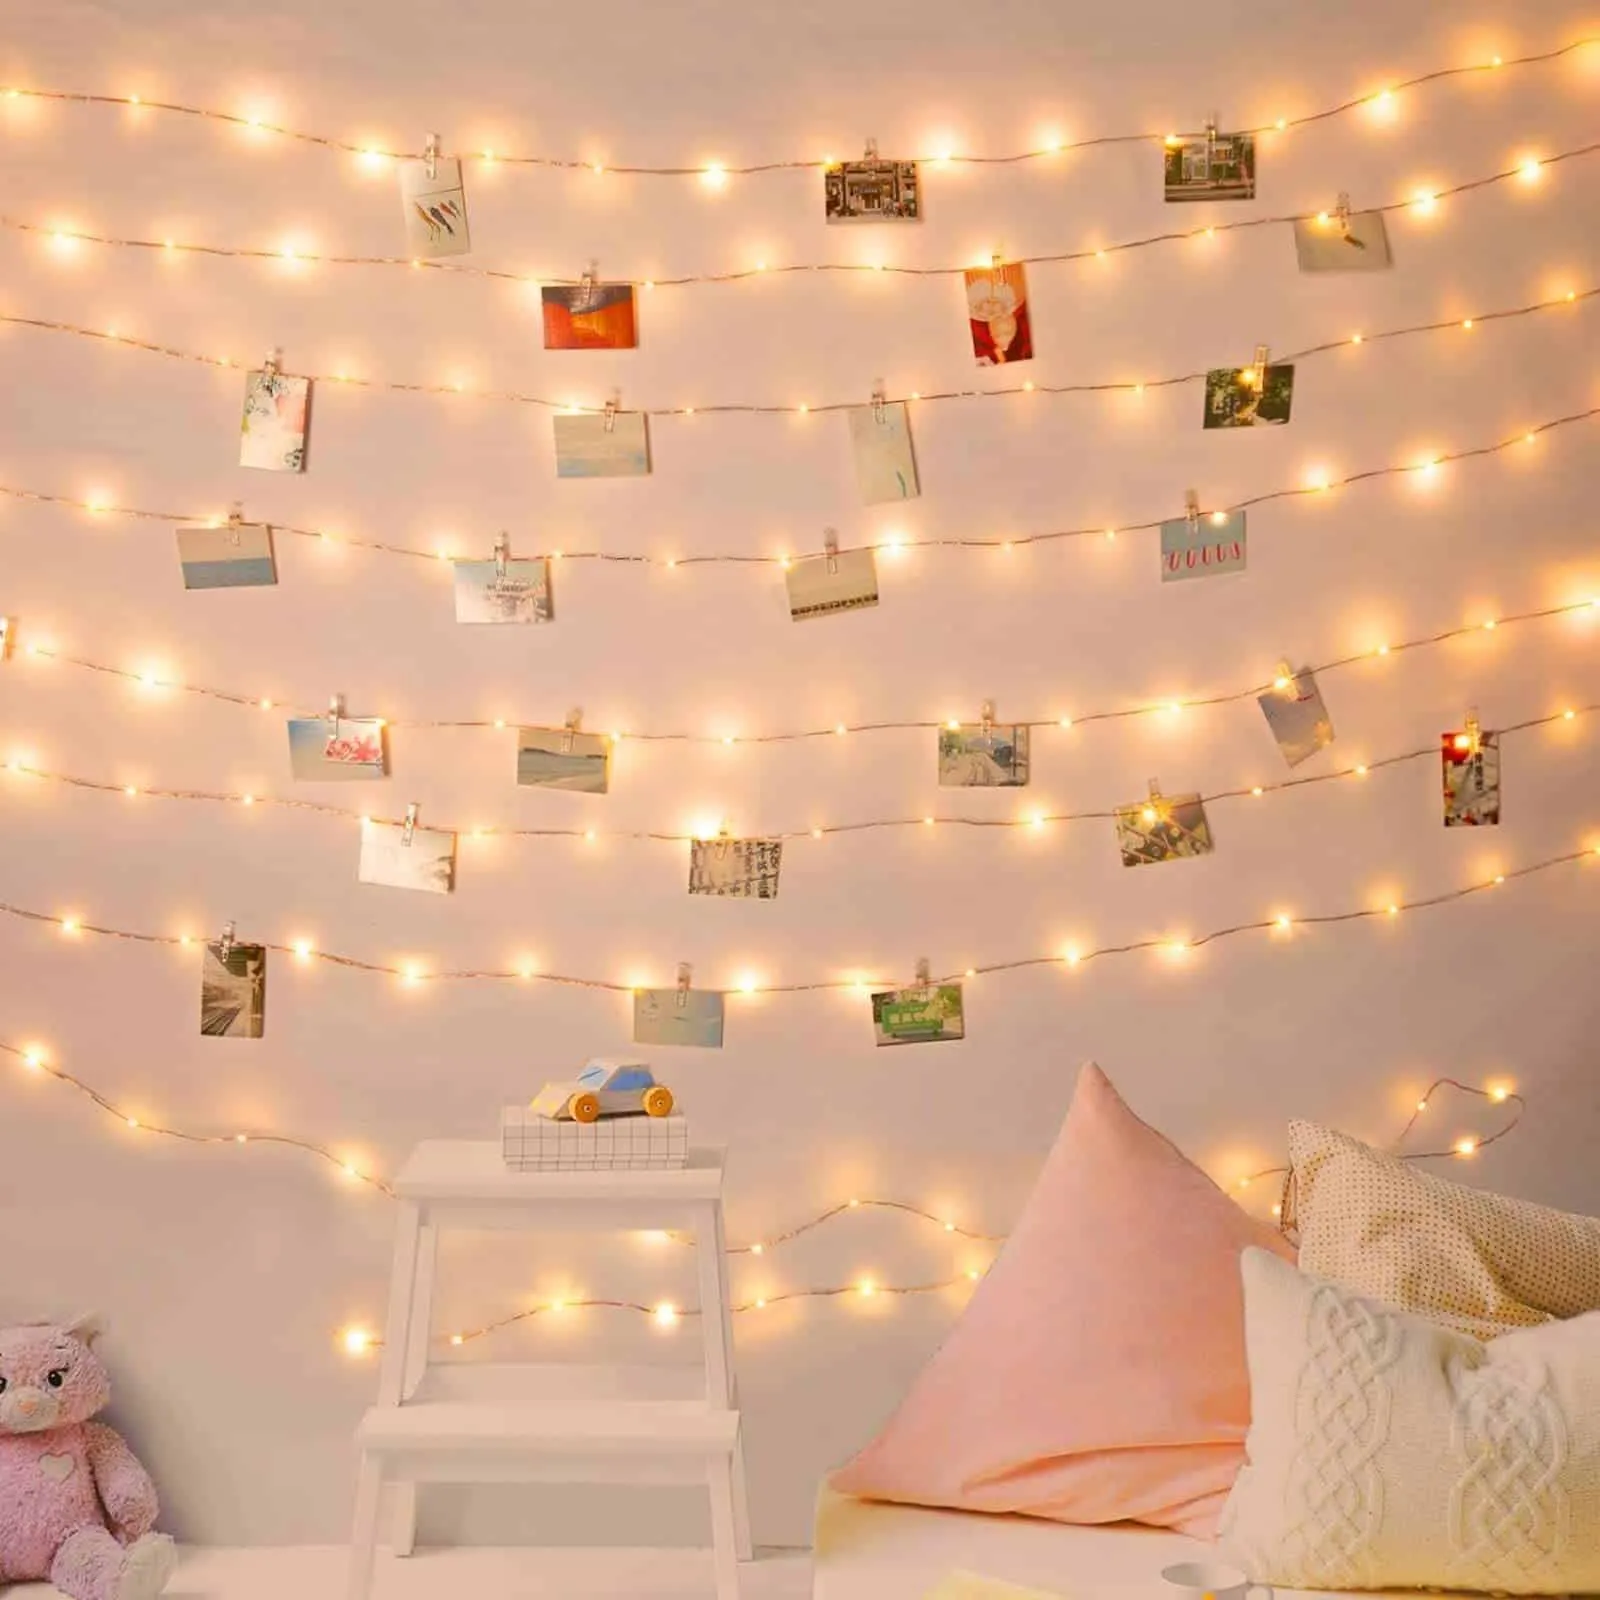  string lights and polaroids give room a cosy feel home decor